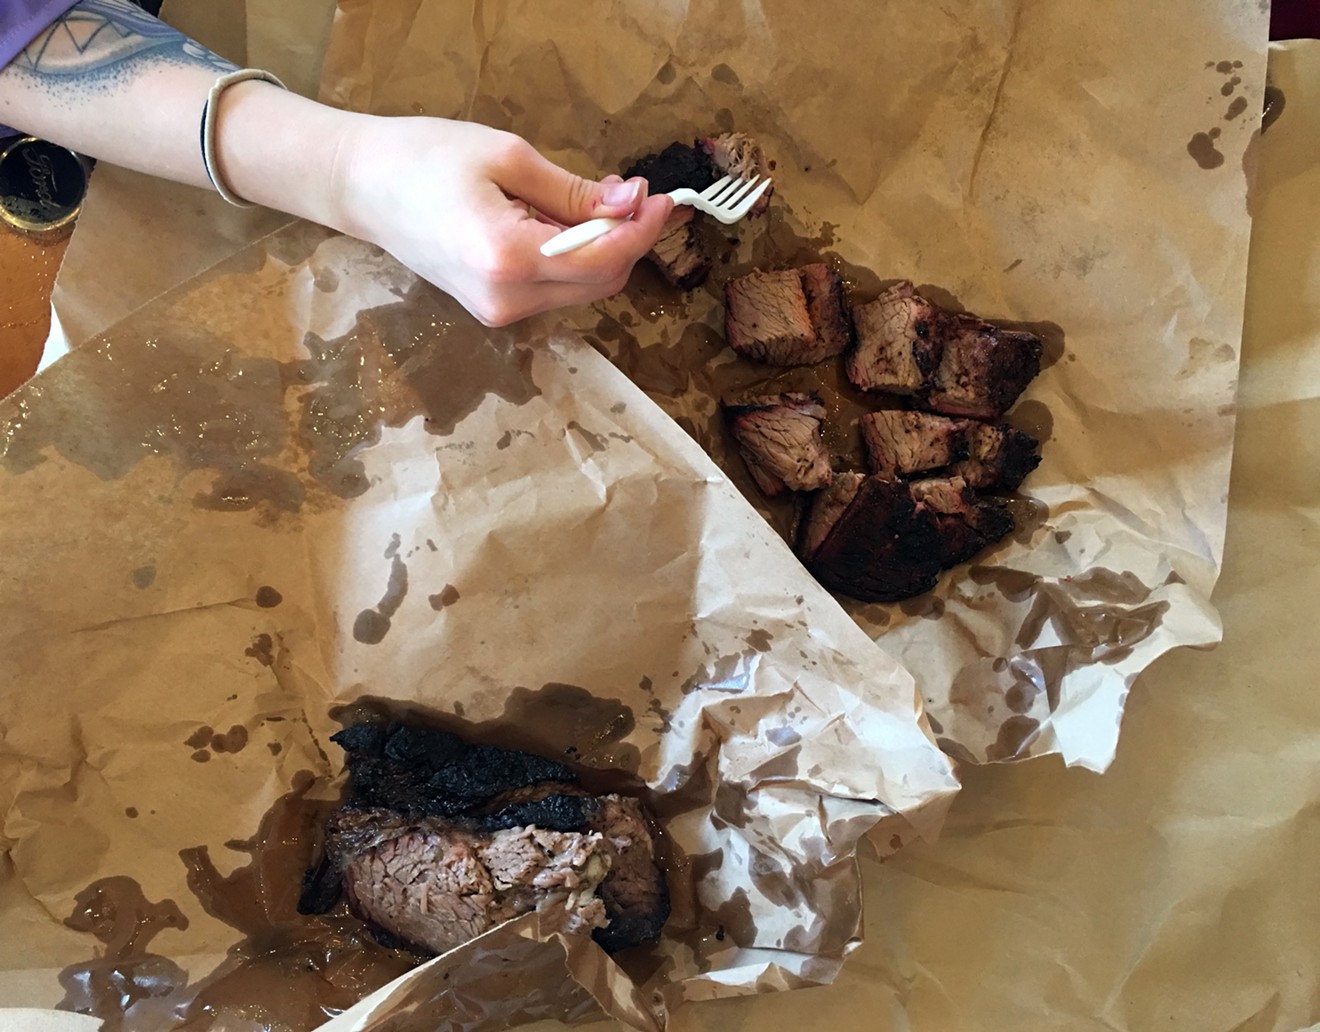 It's burnt end day at Lockhart Smokehouse, but thanks to some thievery, the restaurant may not open today.